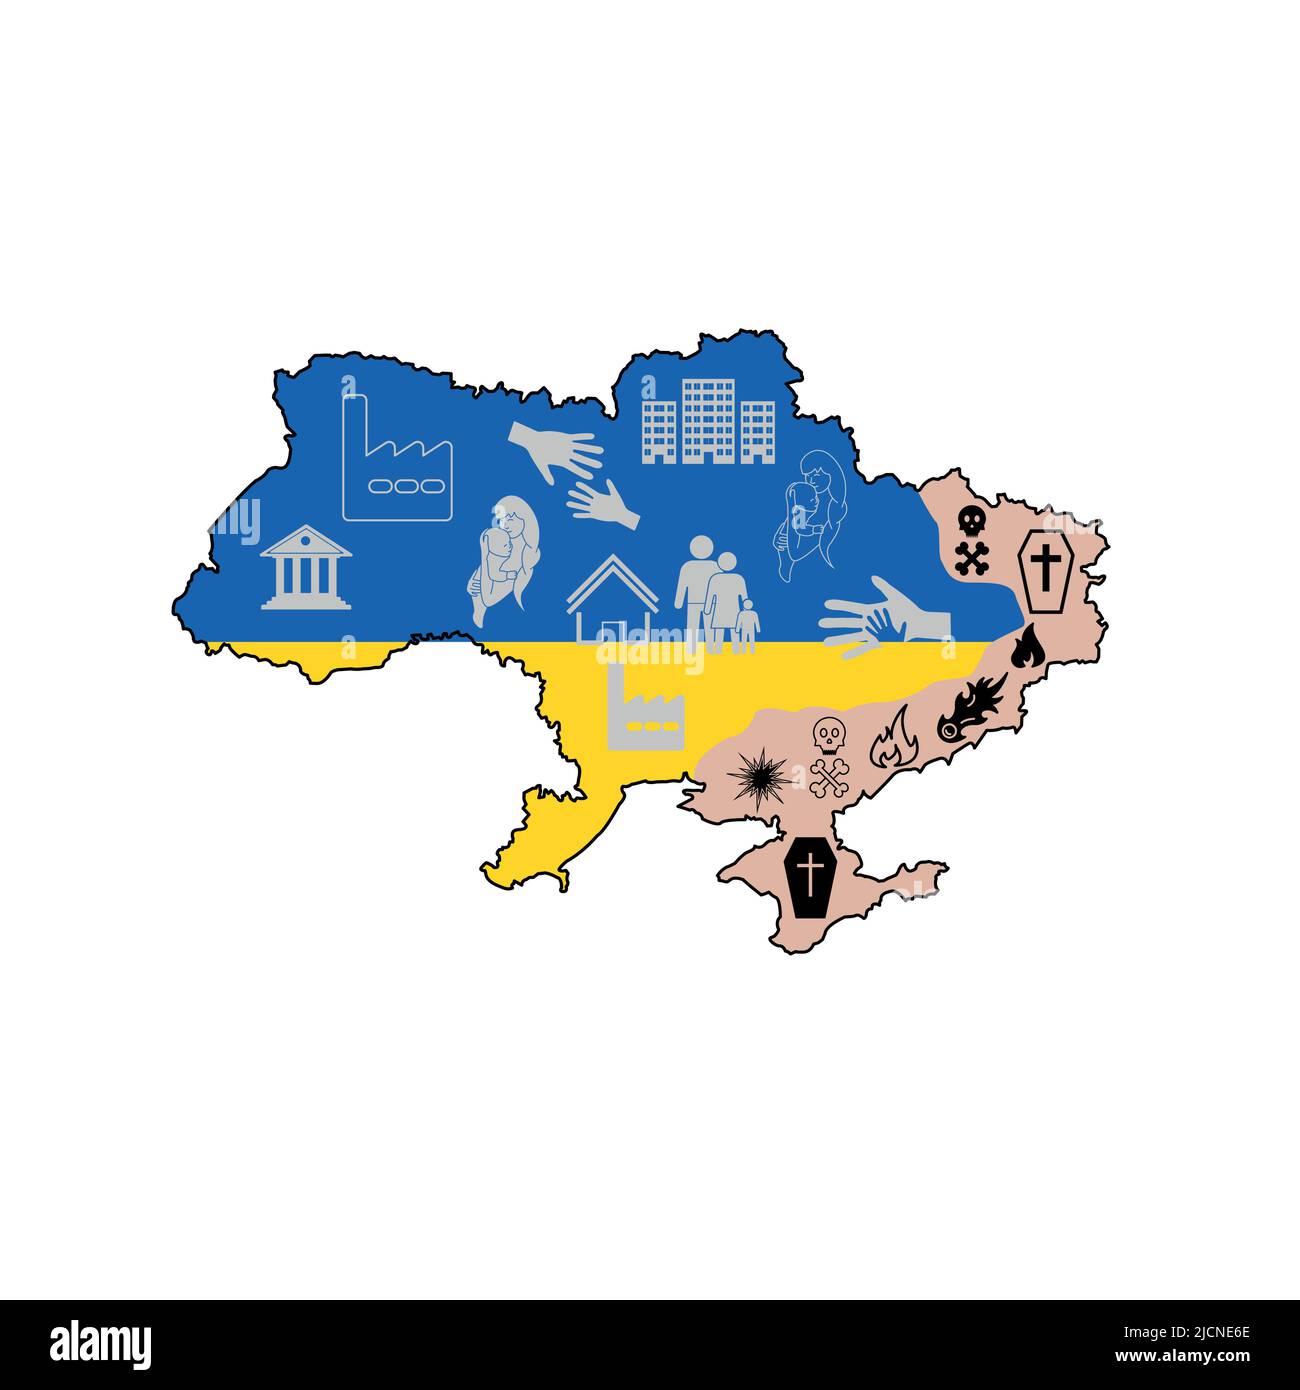 War in Ukraine, Russian invasion of Ukraine. Infographic,  Ukrainian map as symbol of political conflict and military aggression. map of Russian invas Stock Vector